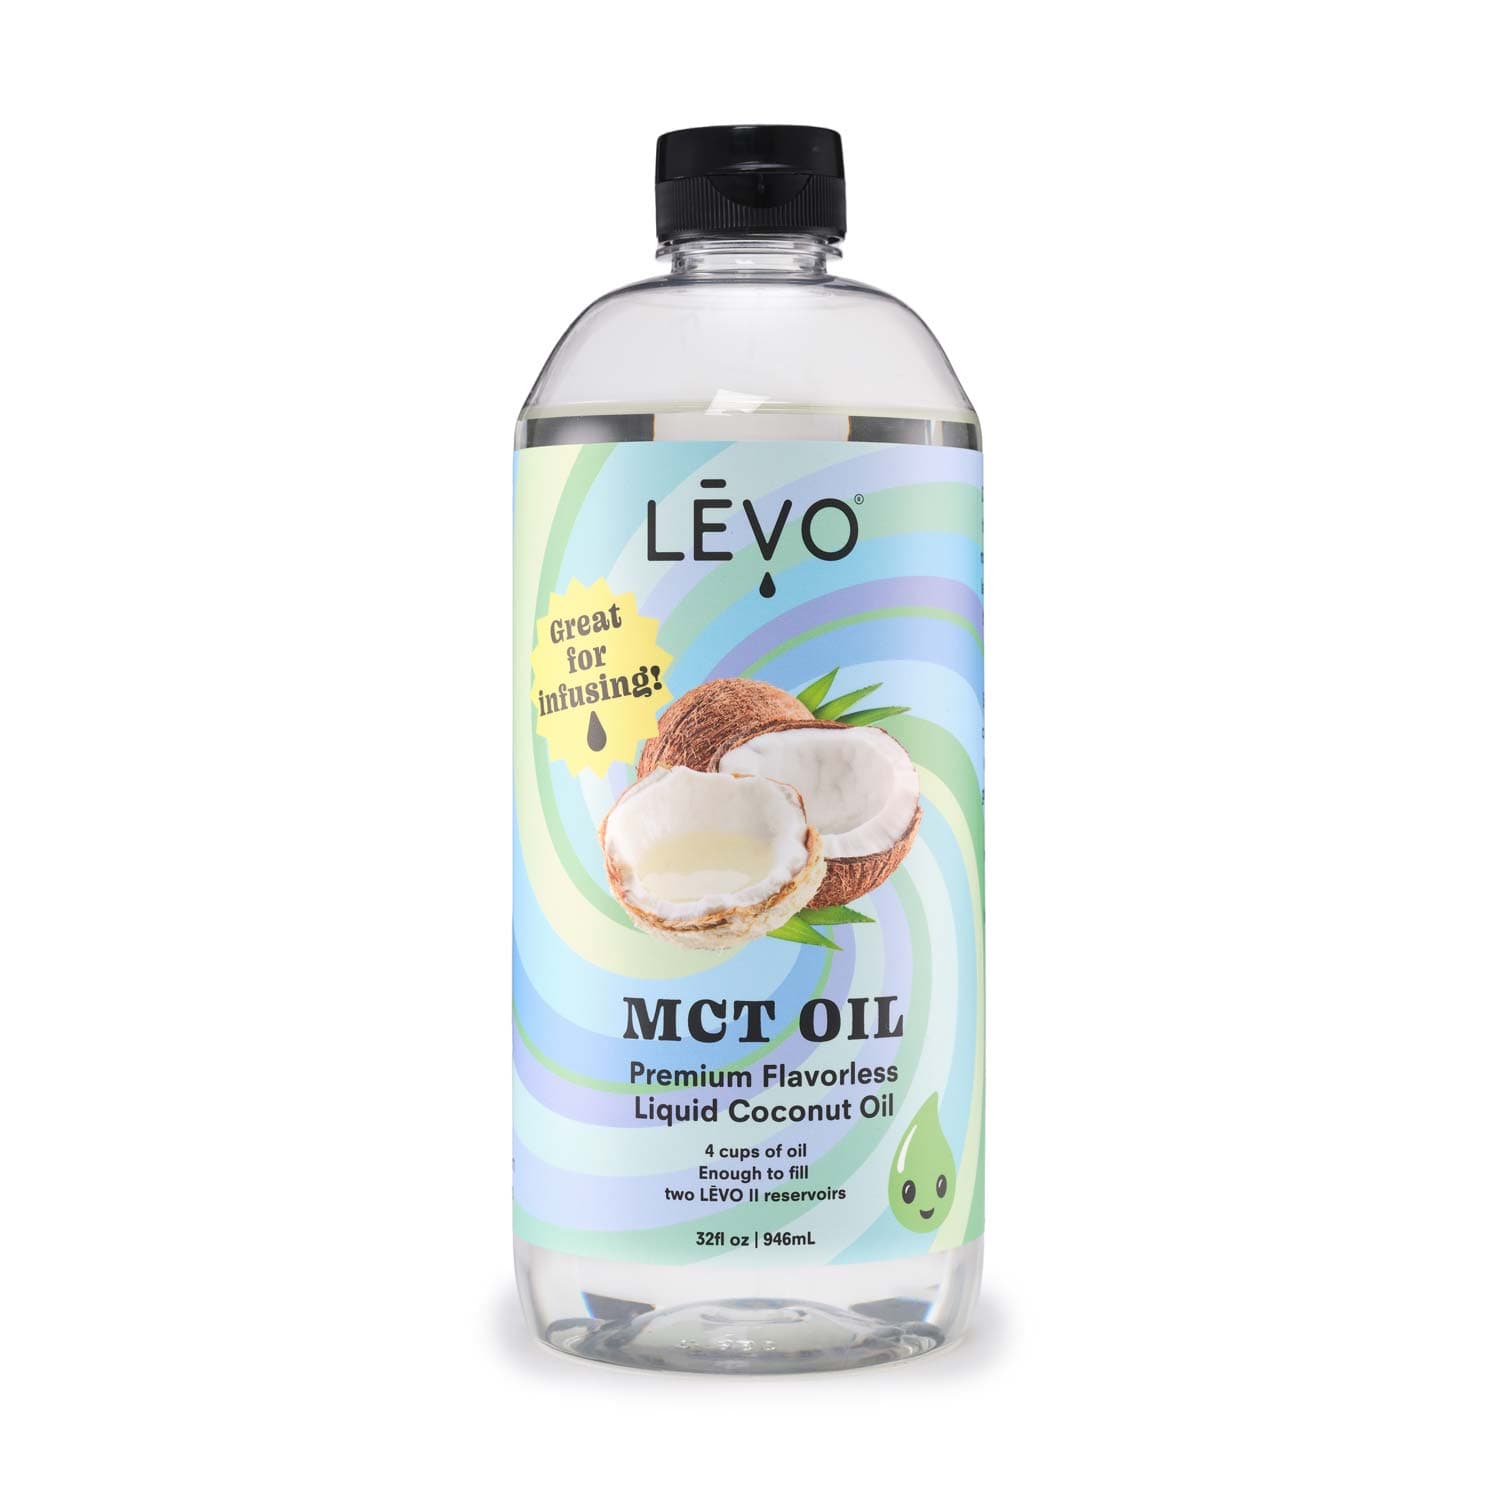 LEVO MCT Oil is a premium, flavorless liquid coconut oil. At 32 fl oz, it will fill 2 LEVO II reservoirs to capacity, 4 cups total. Great for infusing! Easily incorporate the benefits of MCT oil into your favorite recipes with LĒVO 32 fl oz Premium MCT Liquid Coconut Oil.